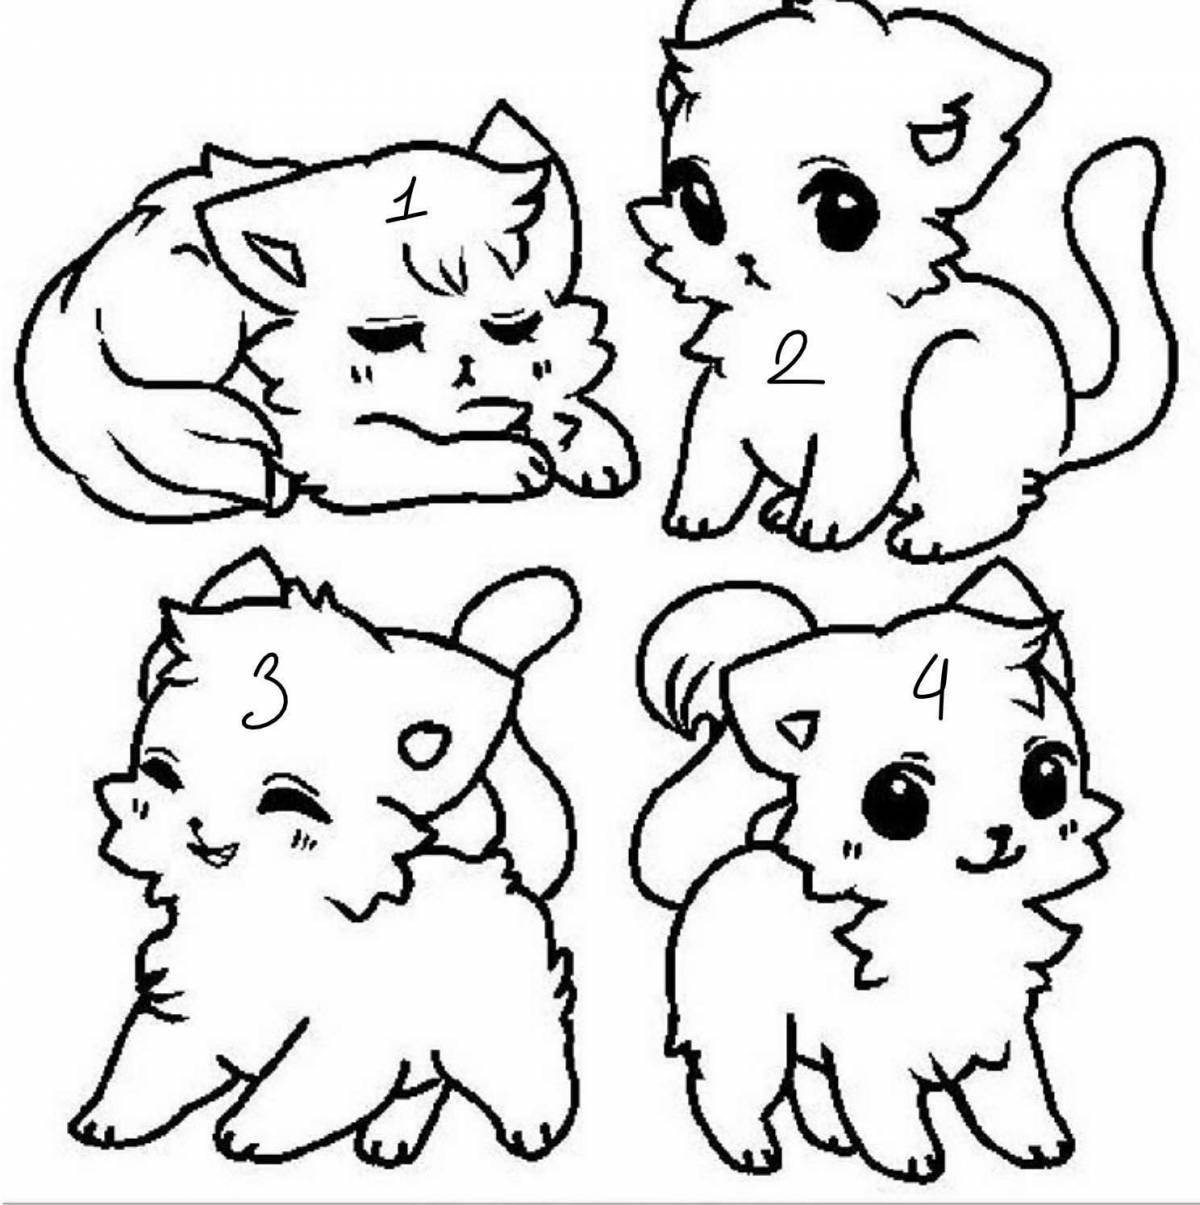 Snugglesome kittens coloring page